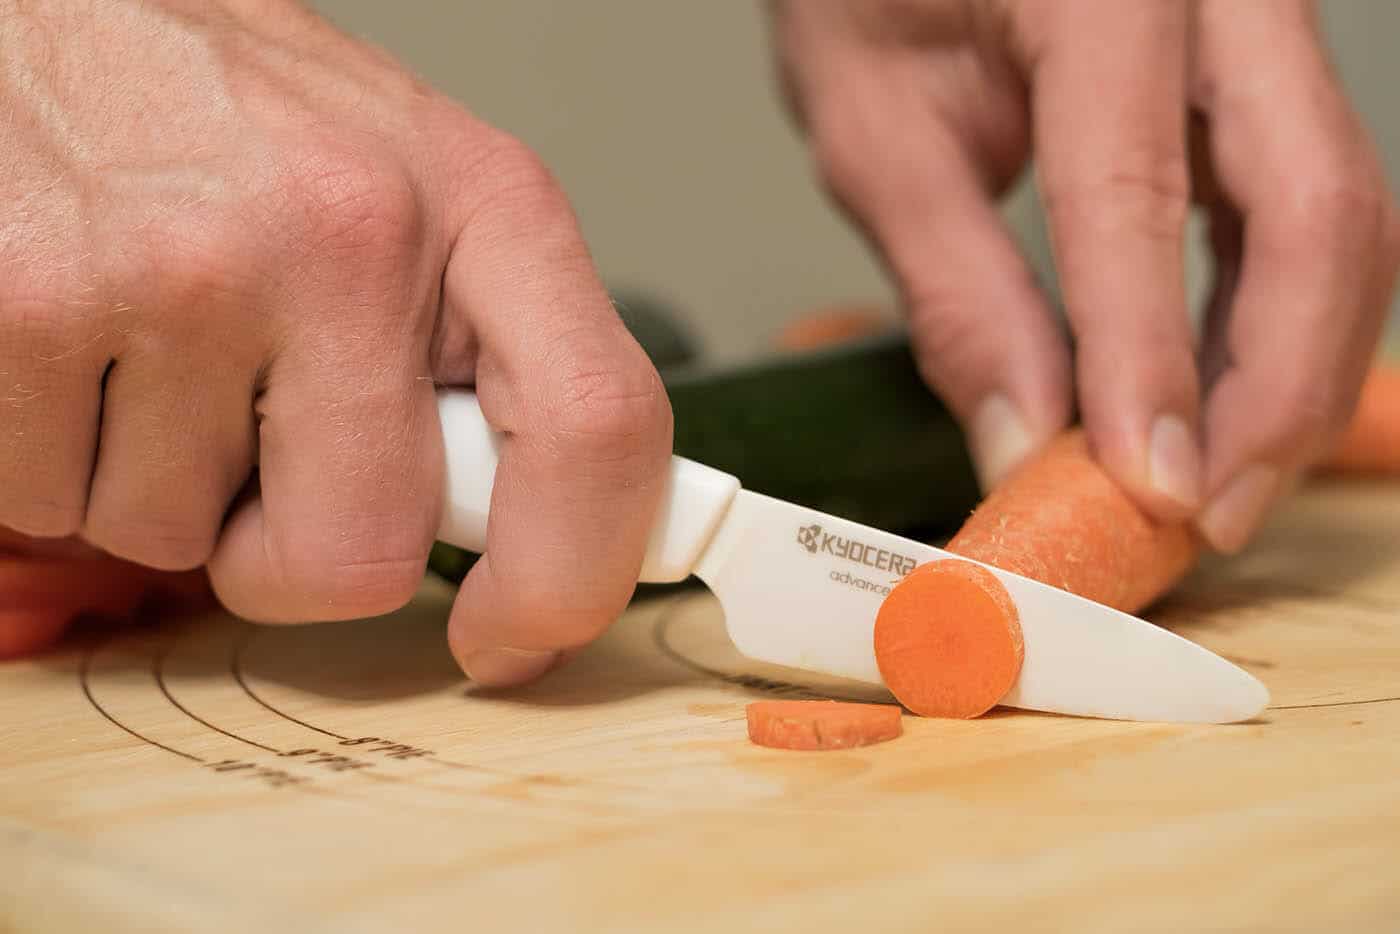 The Kyocers 3 Inch Paring Knife had no problem slicing through carrots in our review.